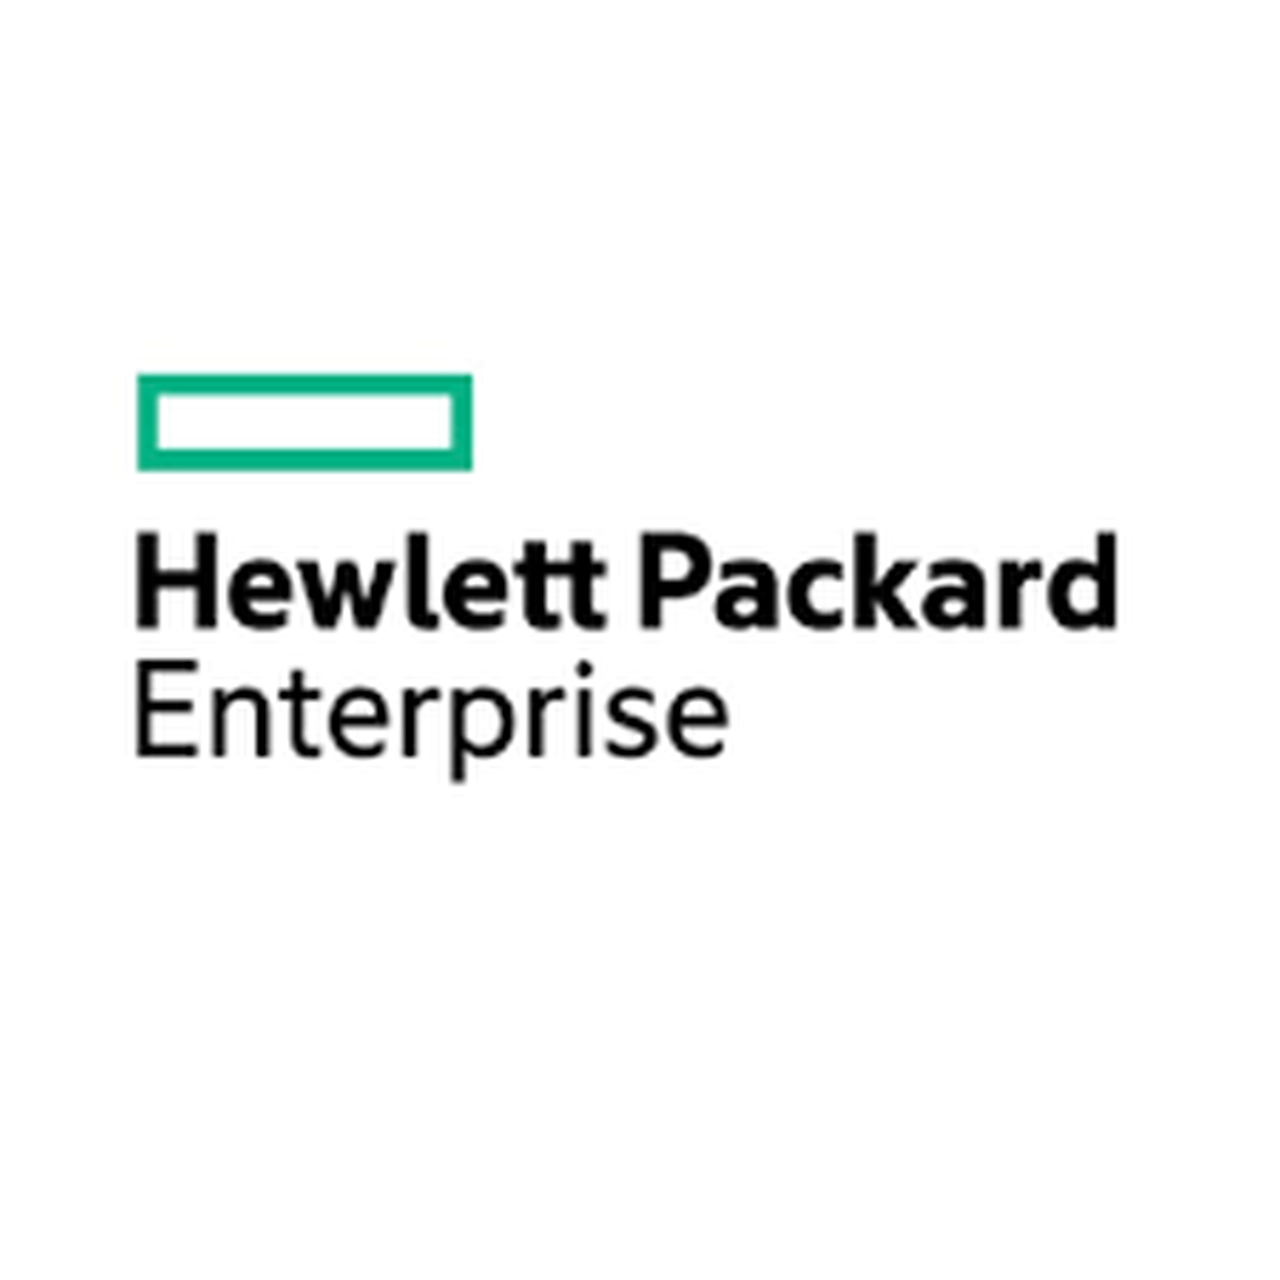 HPE Smart Hbrd Cpctor w/ 260mm Reman Cable Factory integrated (HSSL Sourcing) - HPE Discontinued Product)